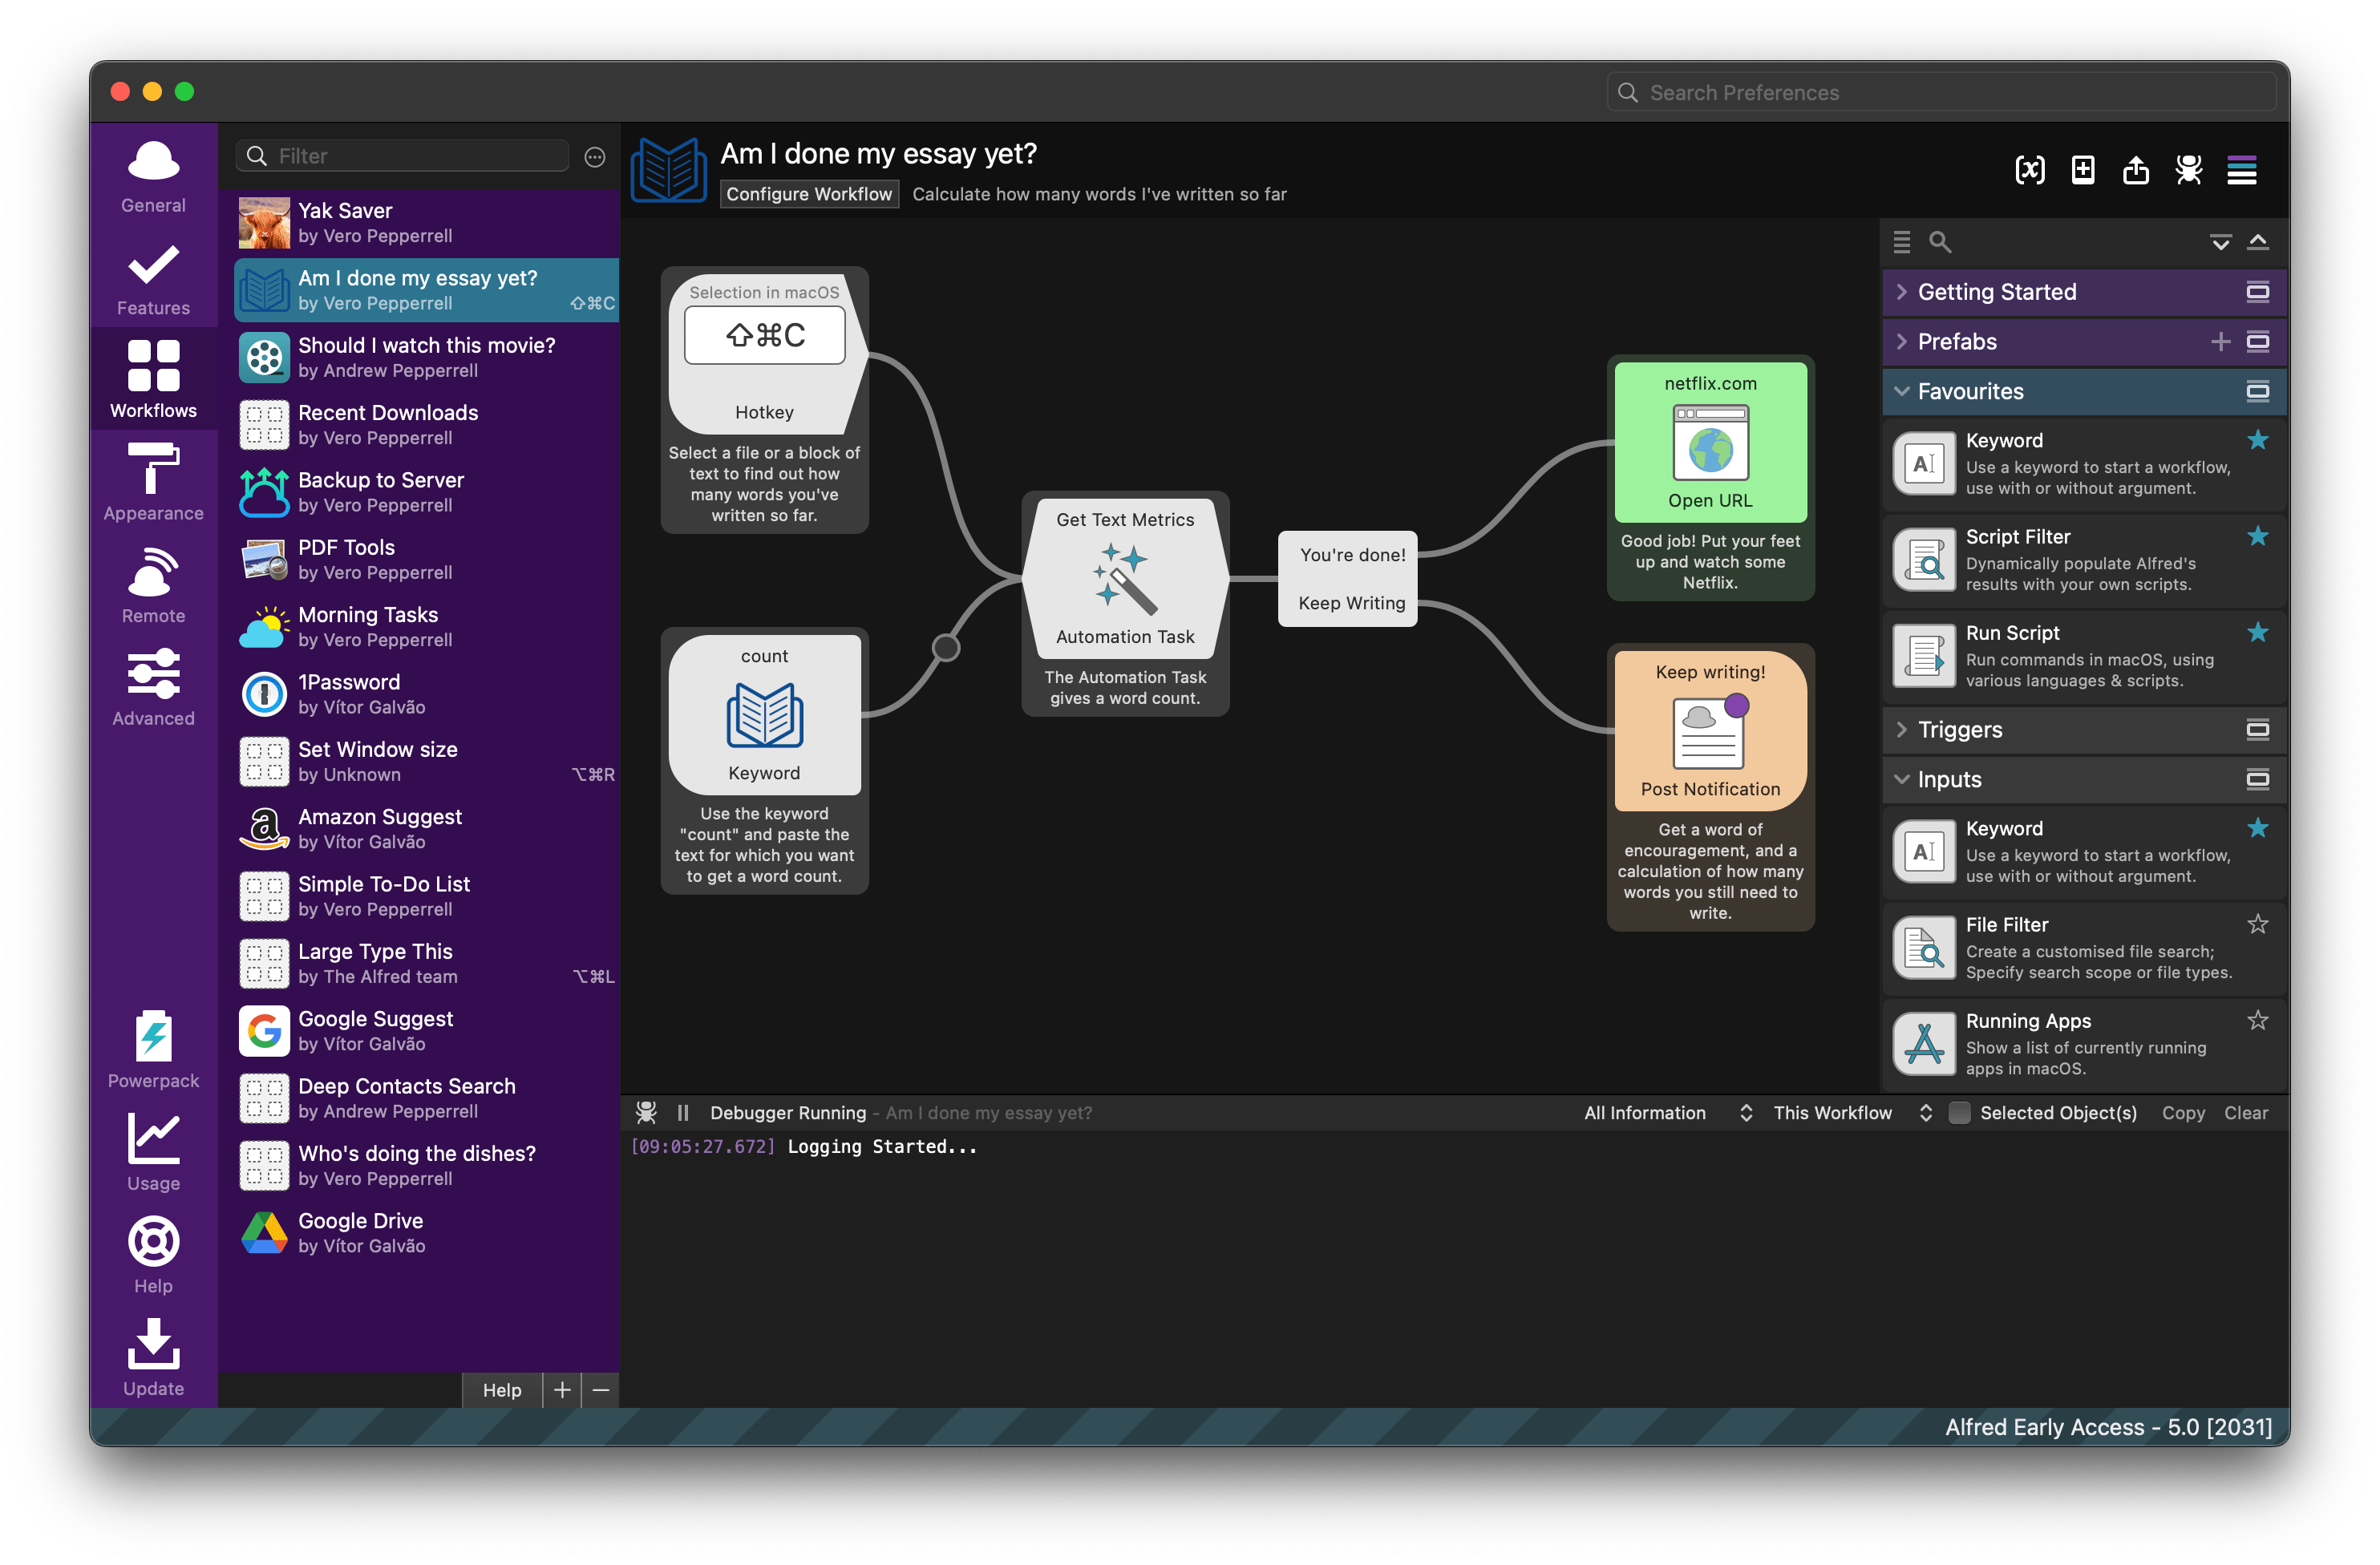 Alfred 5's New Workflow Editor view